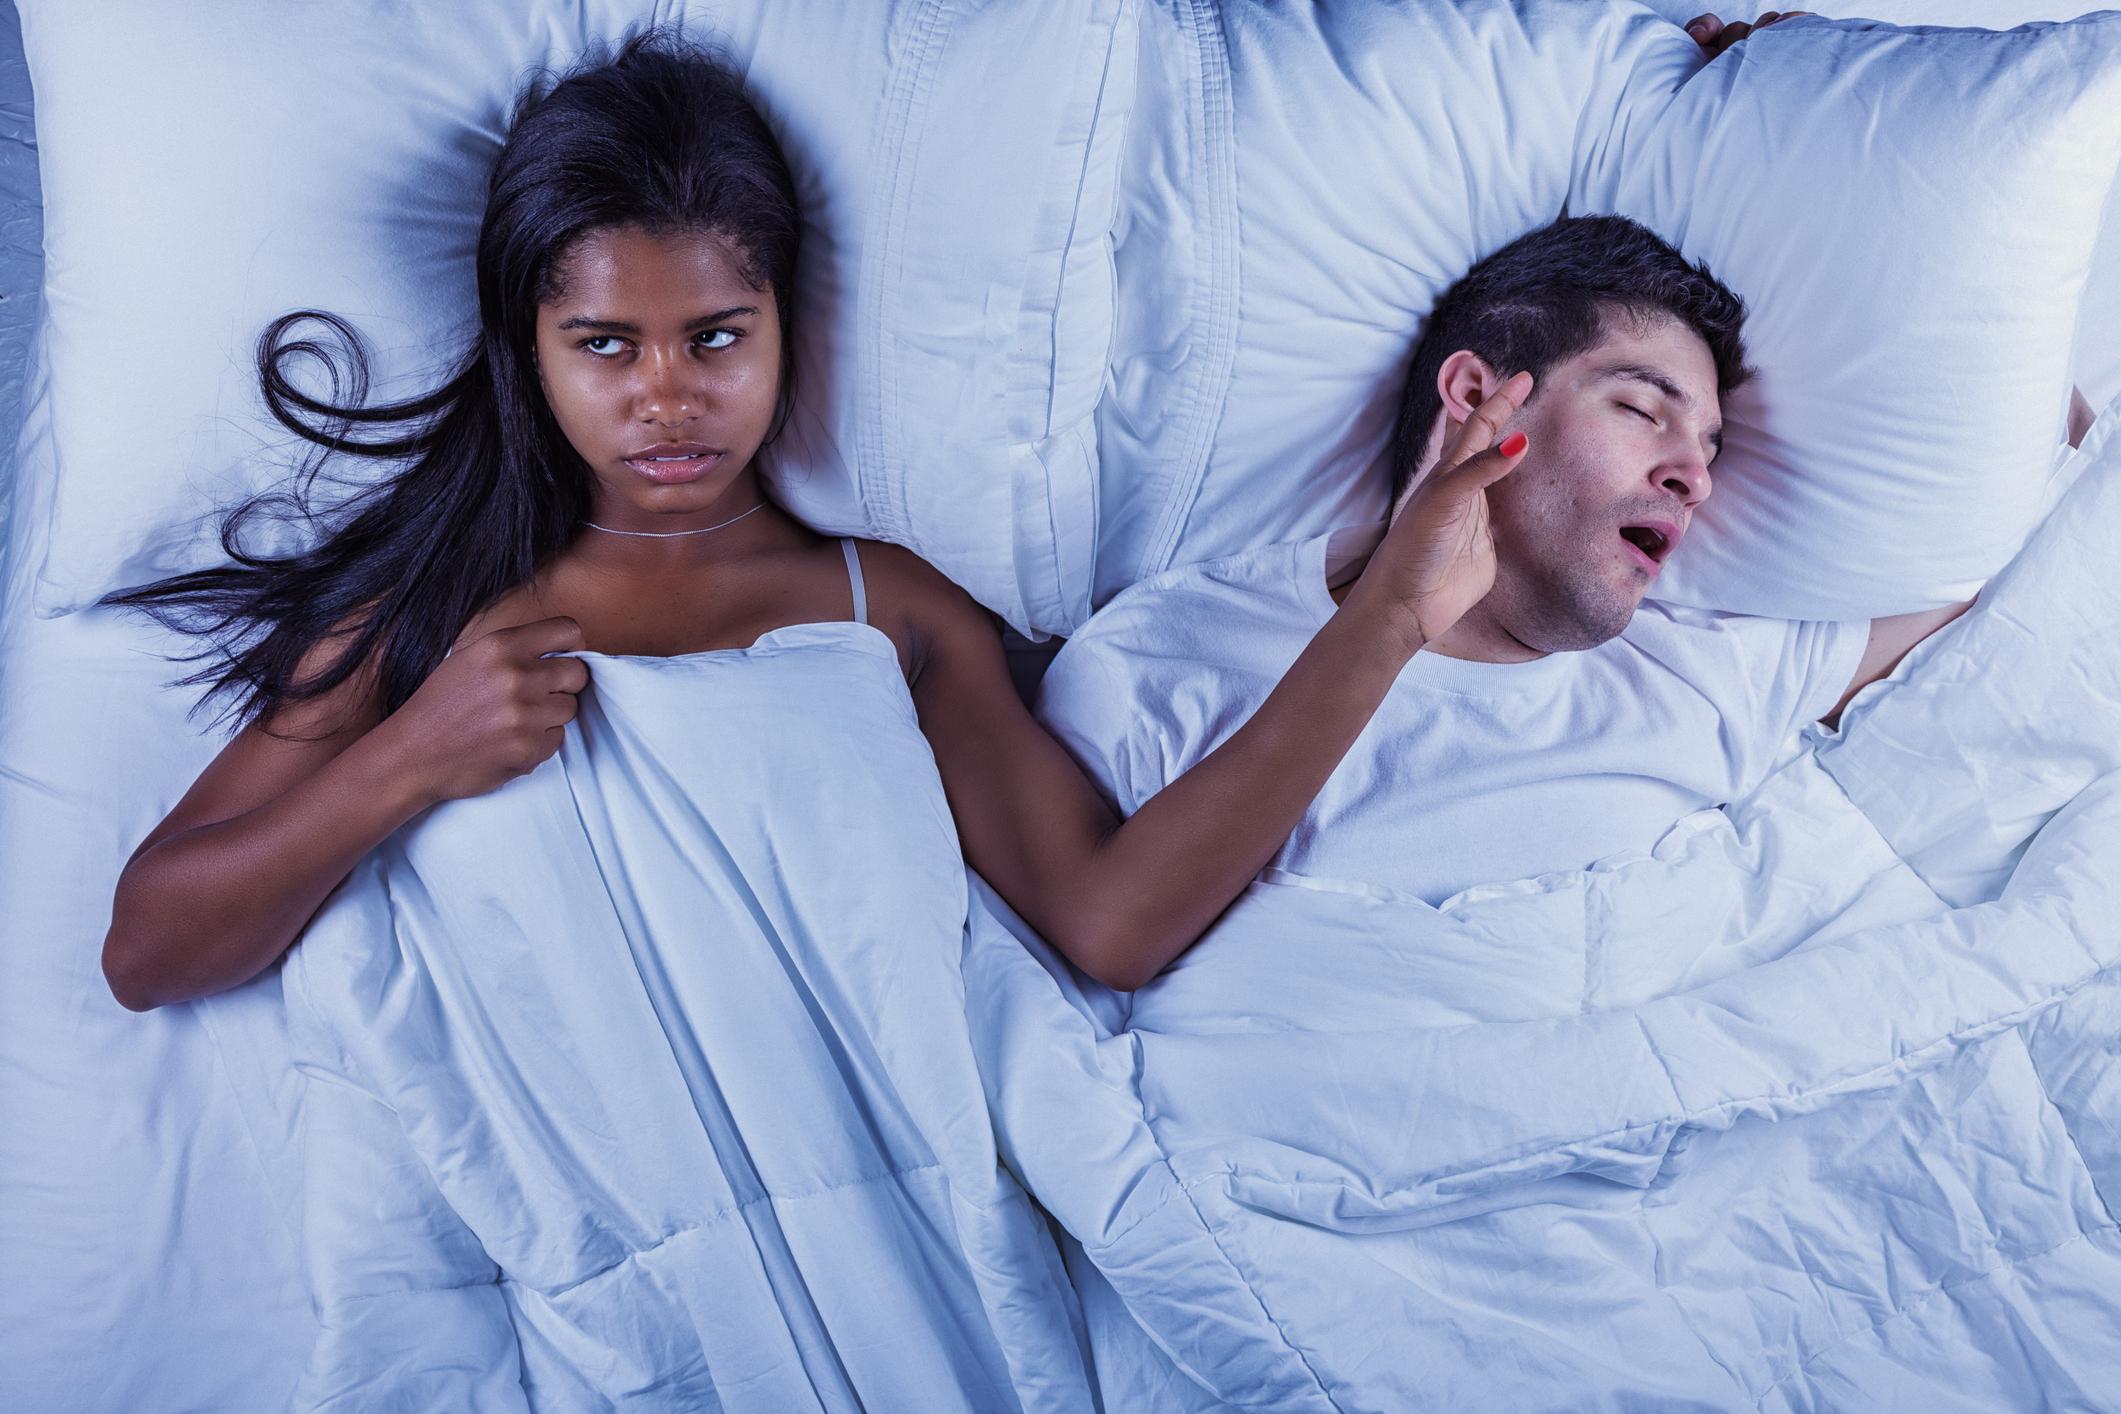 Women who snore have a harder time reaching orgasm, new study suggests The Independent picture